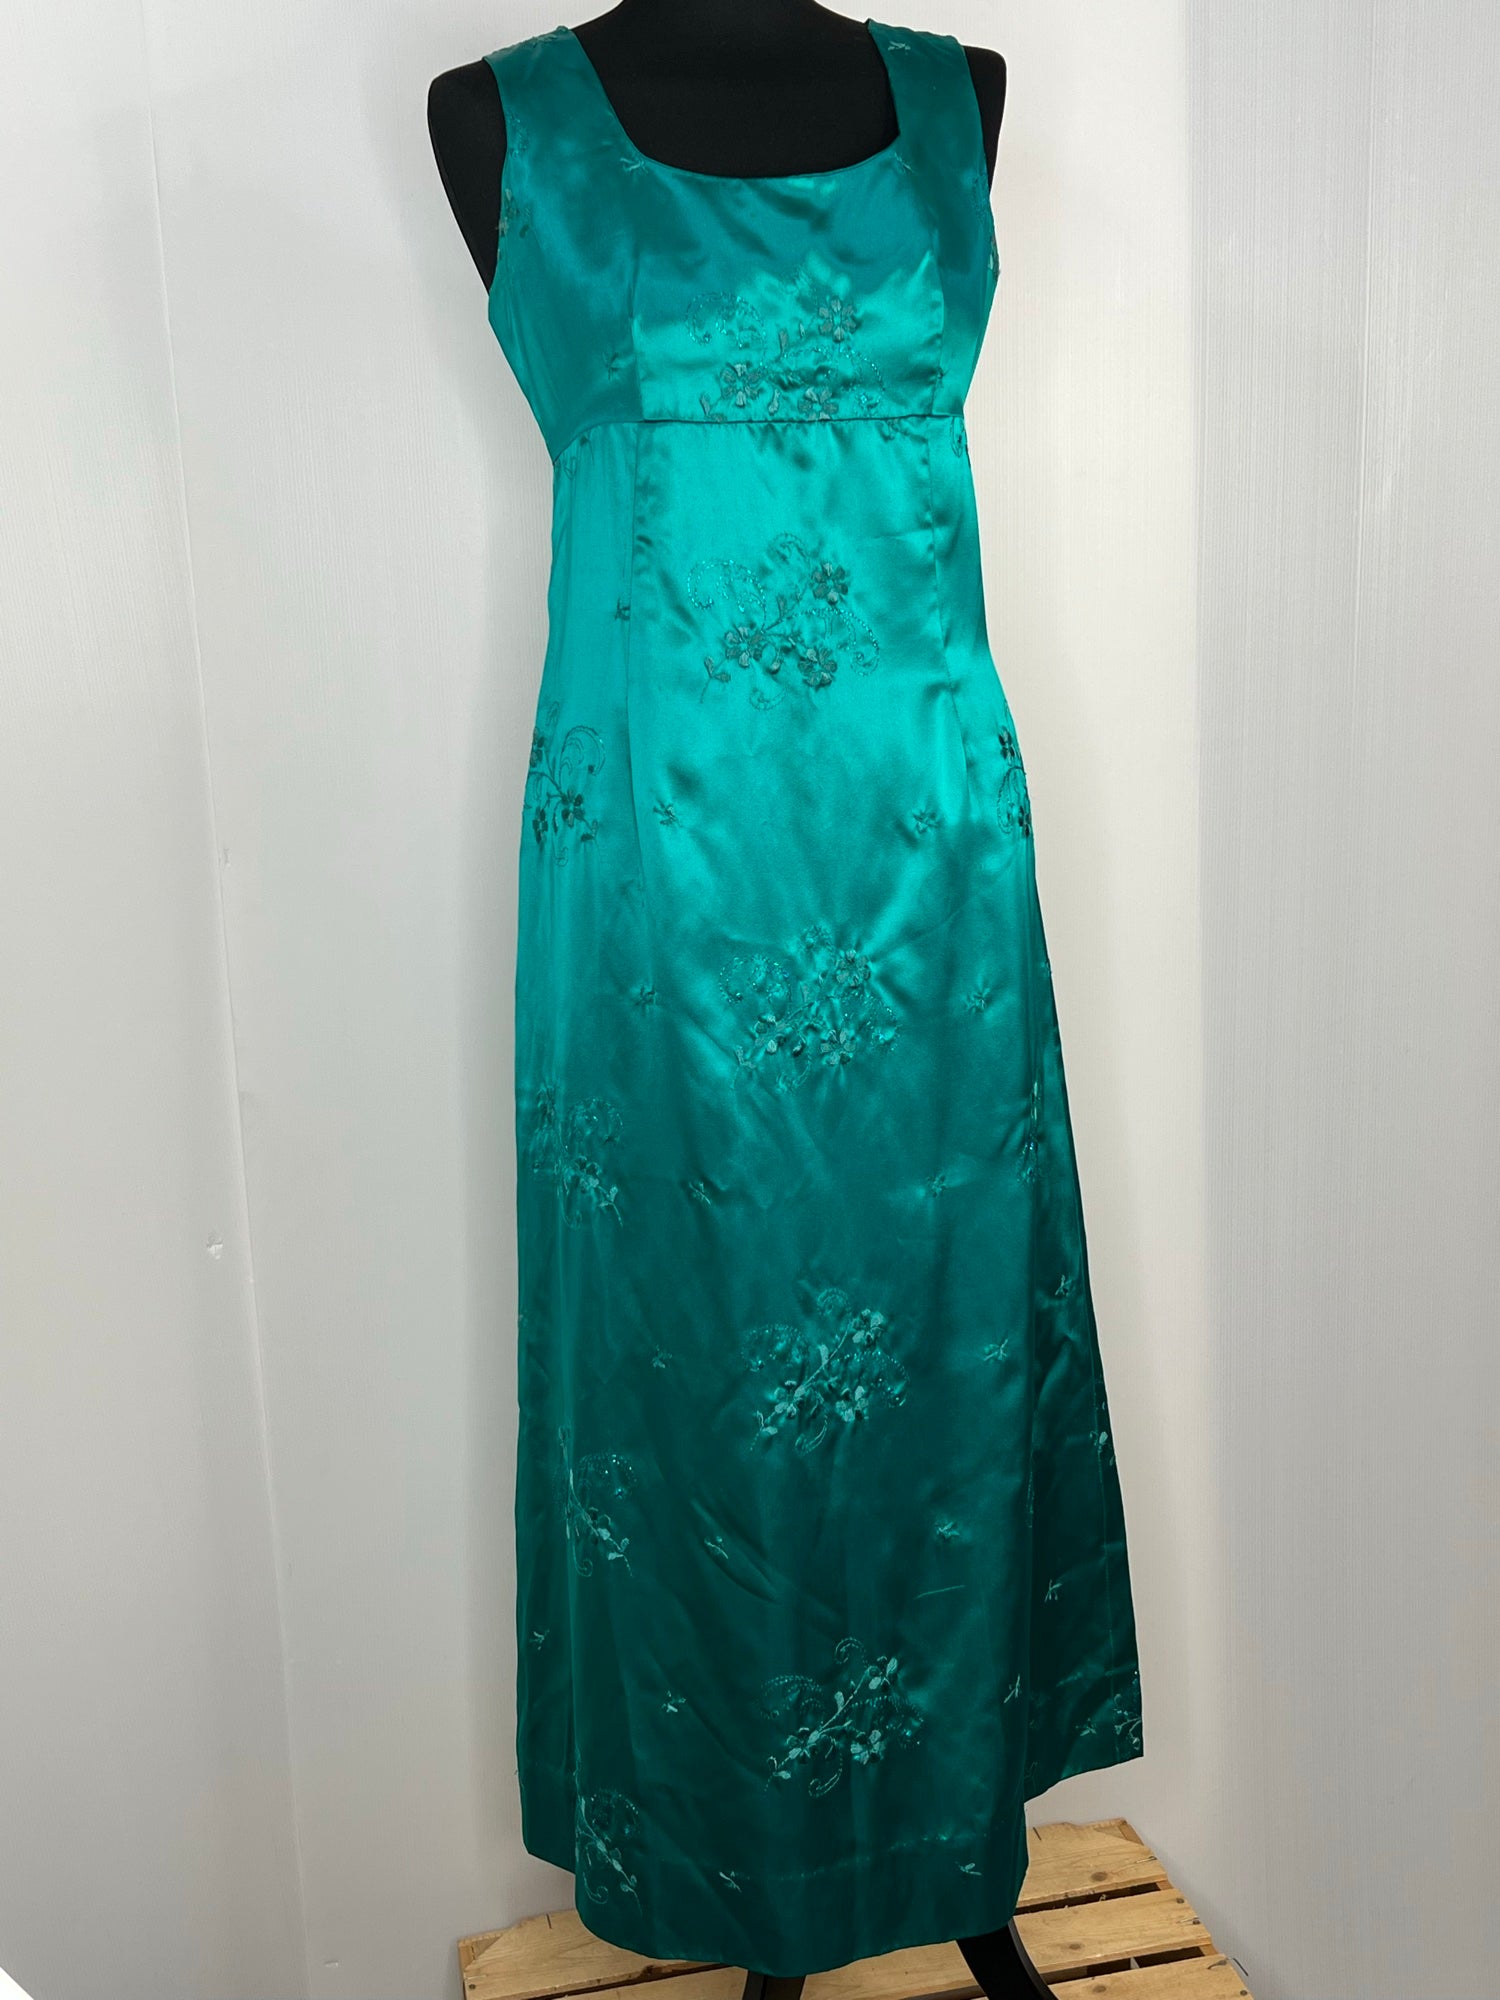 womens  vintage  Turquoise  retro  party season  party dress  oriental  occasion  maxi dress  Green  floral embroidered  evening dress  evening  dress  cocktail  christmassy  christmas  60s  1960s  16